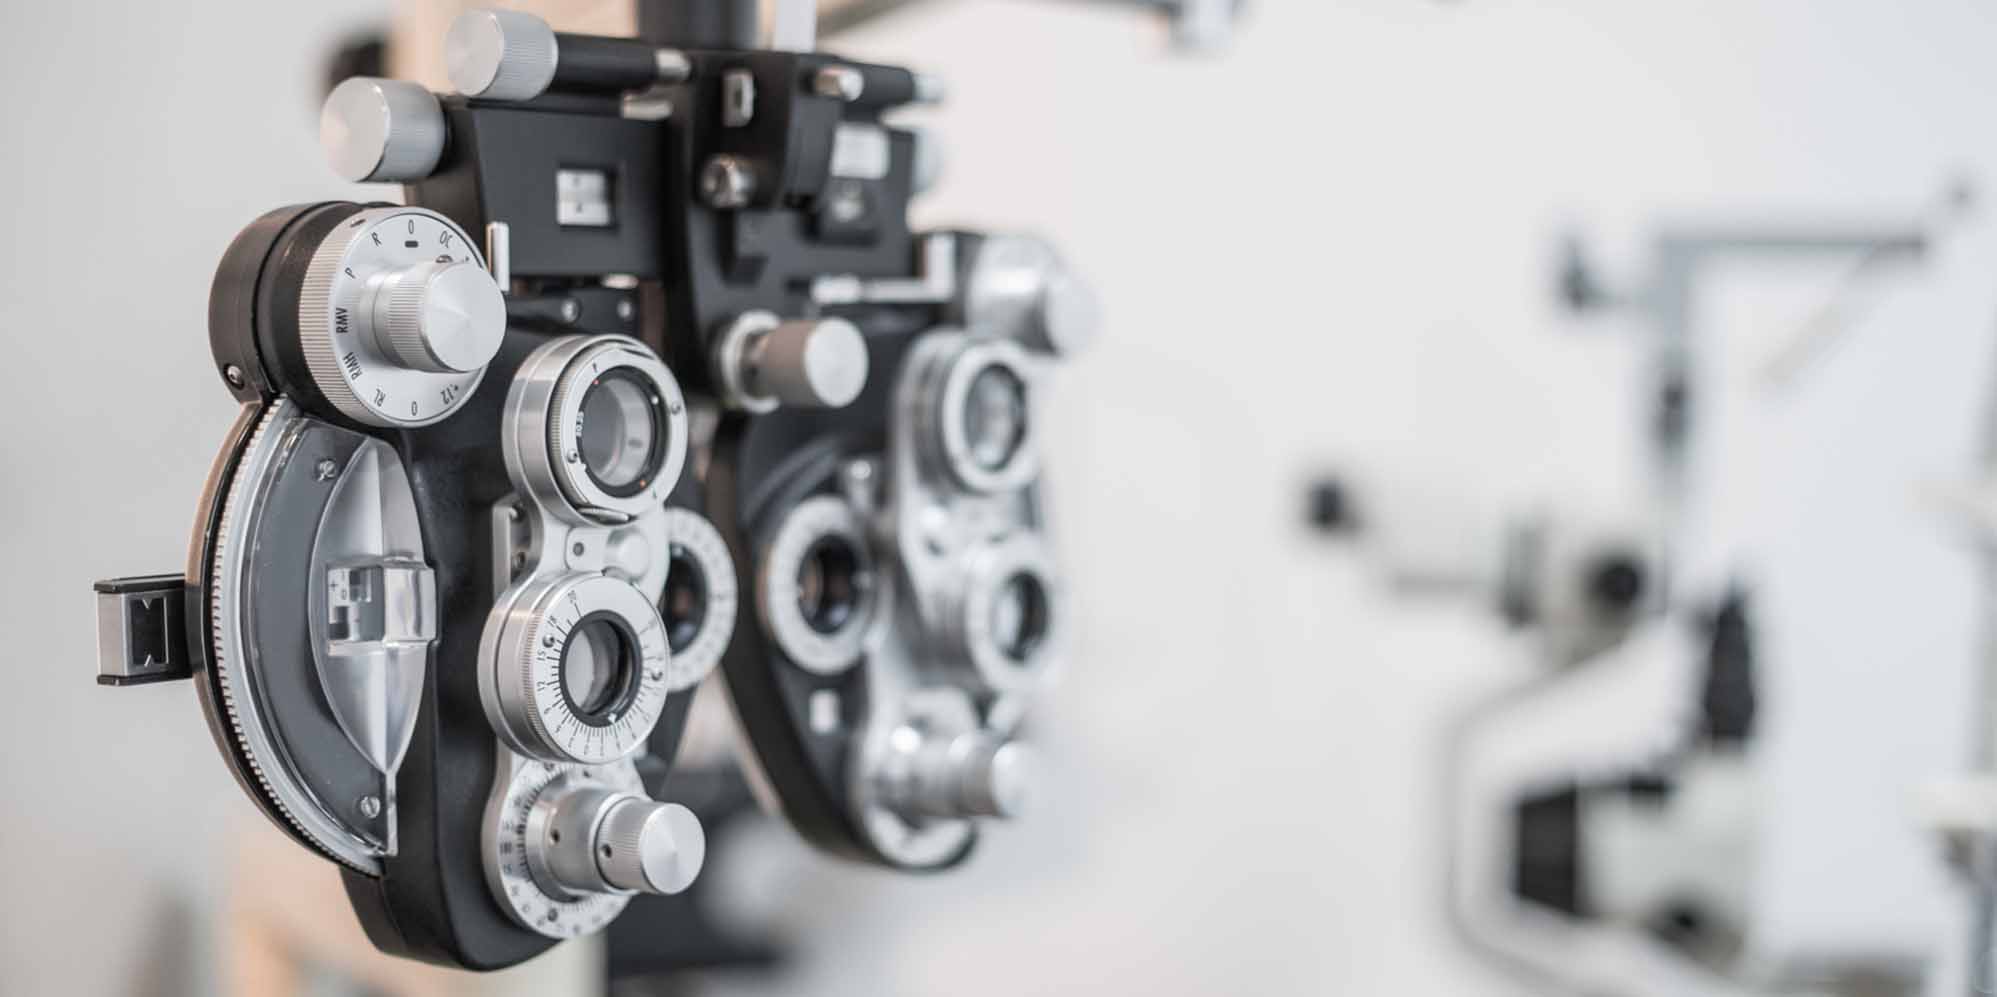 An innovative optometrist's office that utilizes cutting-edge technology in eyeglass fittings.